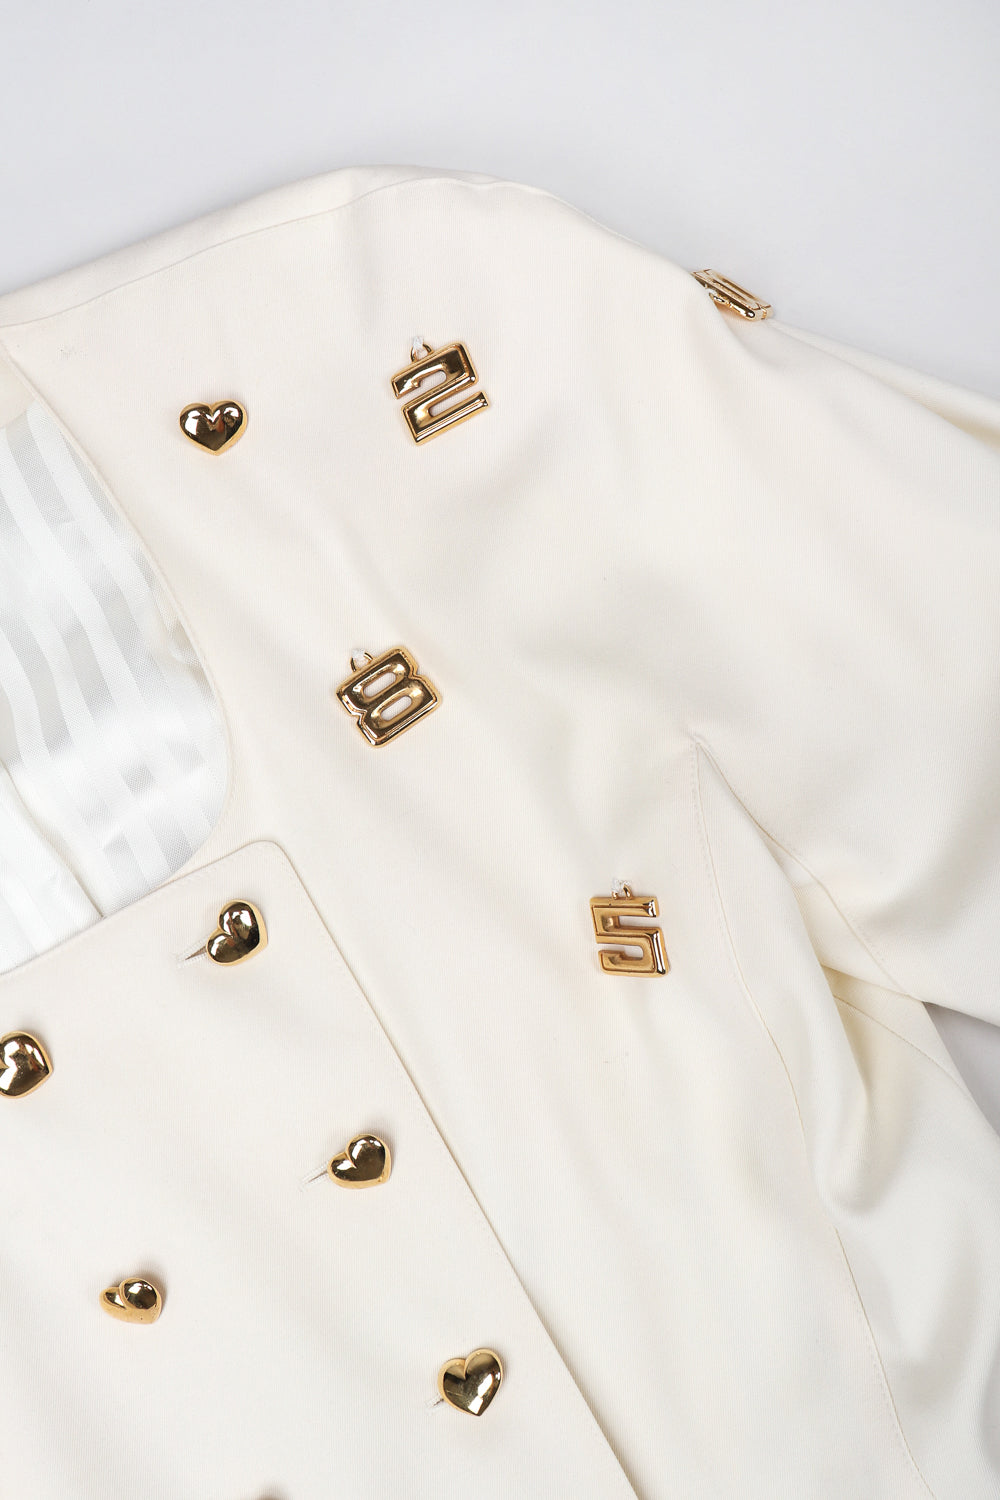 Recess Designer Consignment Vintage Escada Double Breasted Gold Charm Jacket Los Angeles Resale Recycled